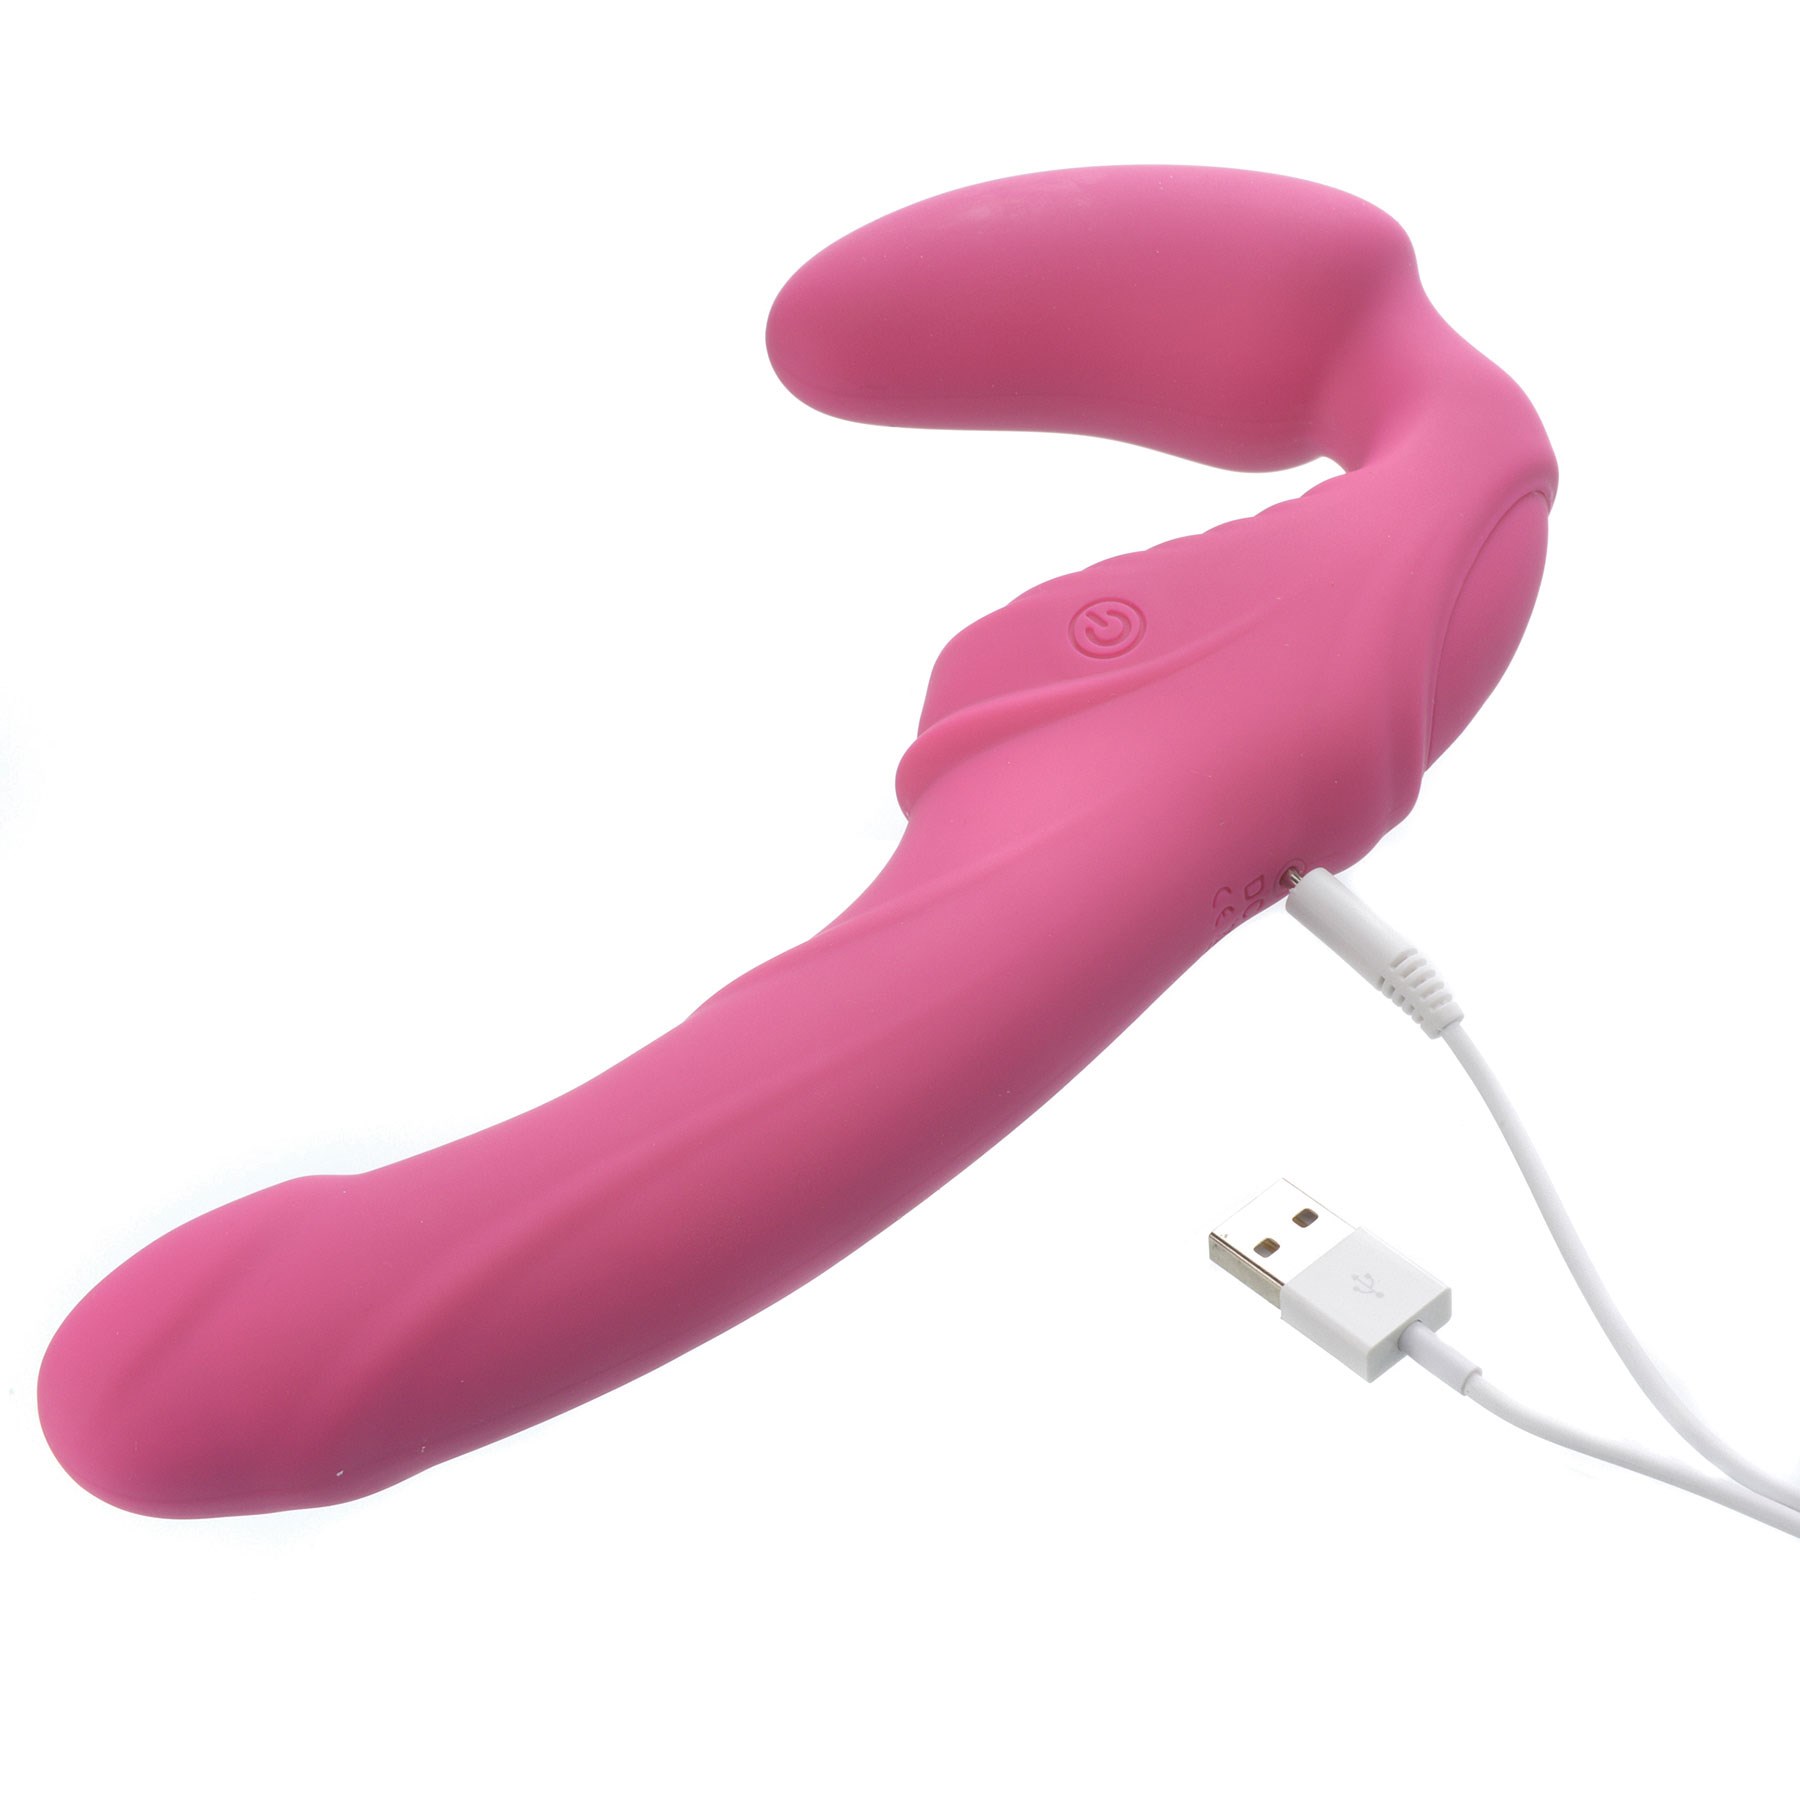 Eve's Vibrating Strapless Strap-On with charger